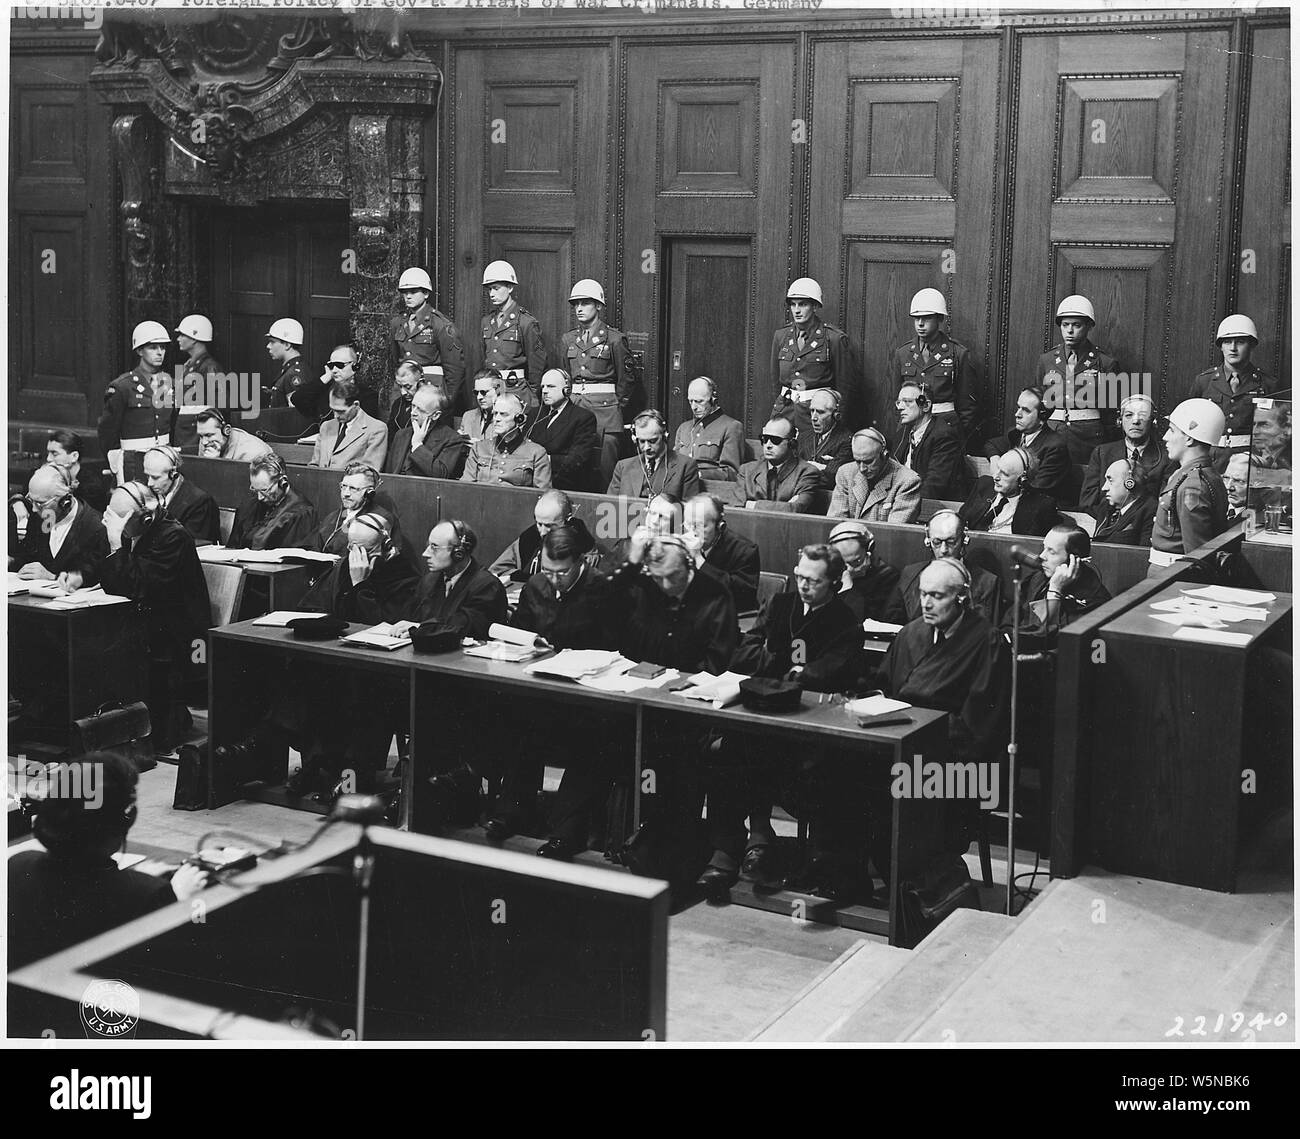 German War Crimes Trials. Nuernberg & Dachau; Scope and content:  The prosecution charges the defendants with conspiring to destroy the independence of other nations. Goering is in the defendant's box. The defendants, surrounded by American military police, Goering, Hess, Von Ribbentrop, Keiter, Rosenberg, Frank, Frick, Streicher, Funk, Schacht; back row, Donitz, Raeder, Von Schirach, Sauckel, Jodl, Von Papen, Seyss-Inquart, Speer, Von Neurath, and Hans Fritsche. 11/23/45. Stock Photo